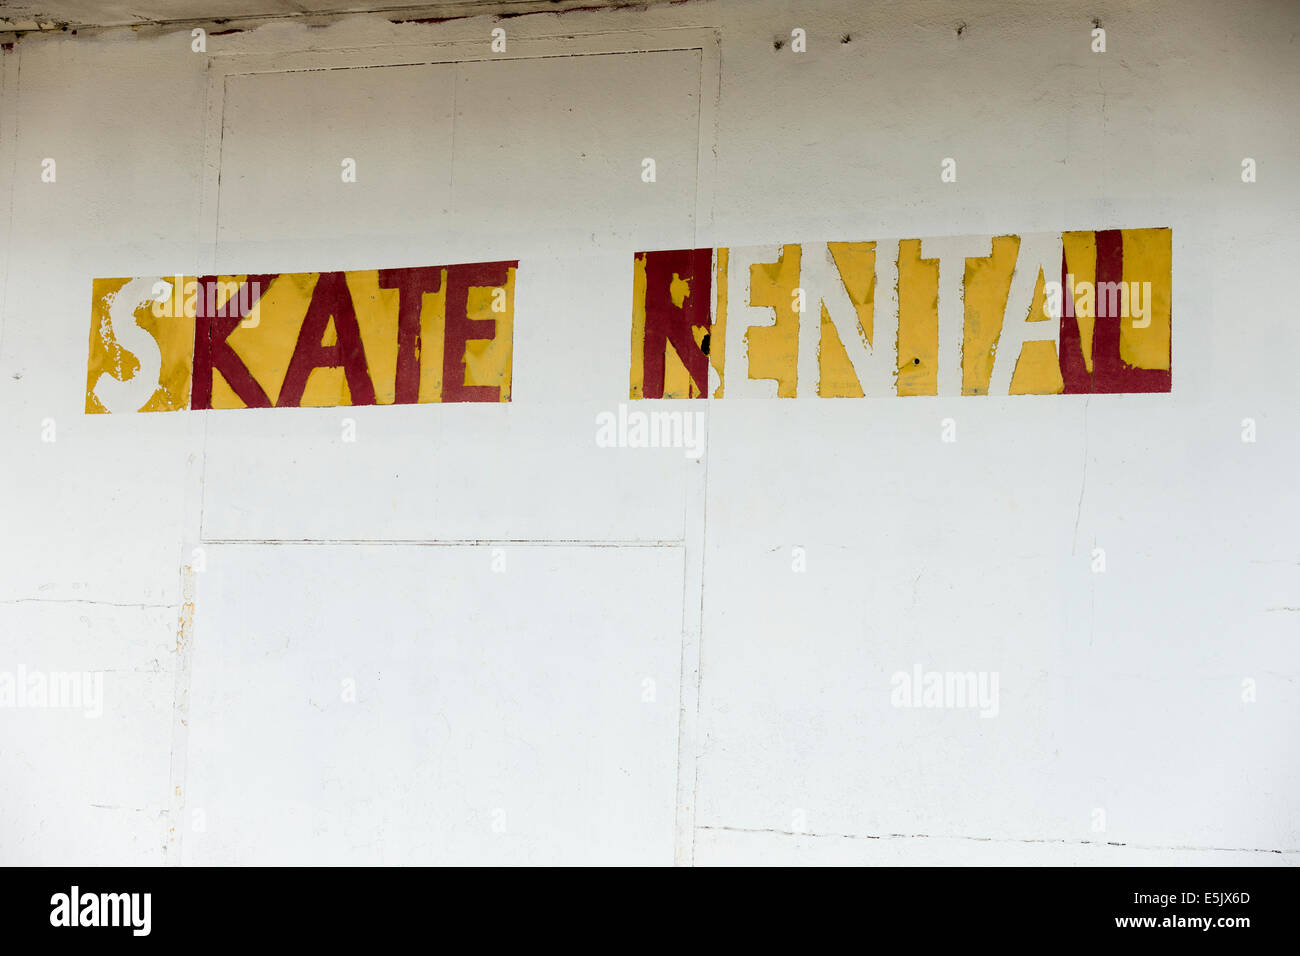 weathered sign 'Skate rental' on the white painted wall Stock Photo